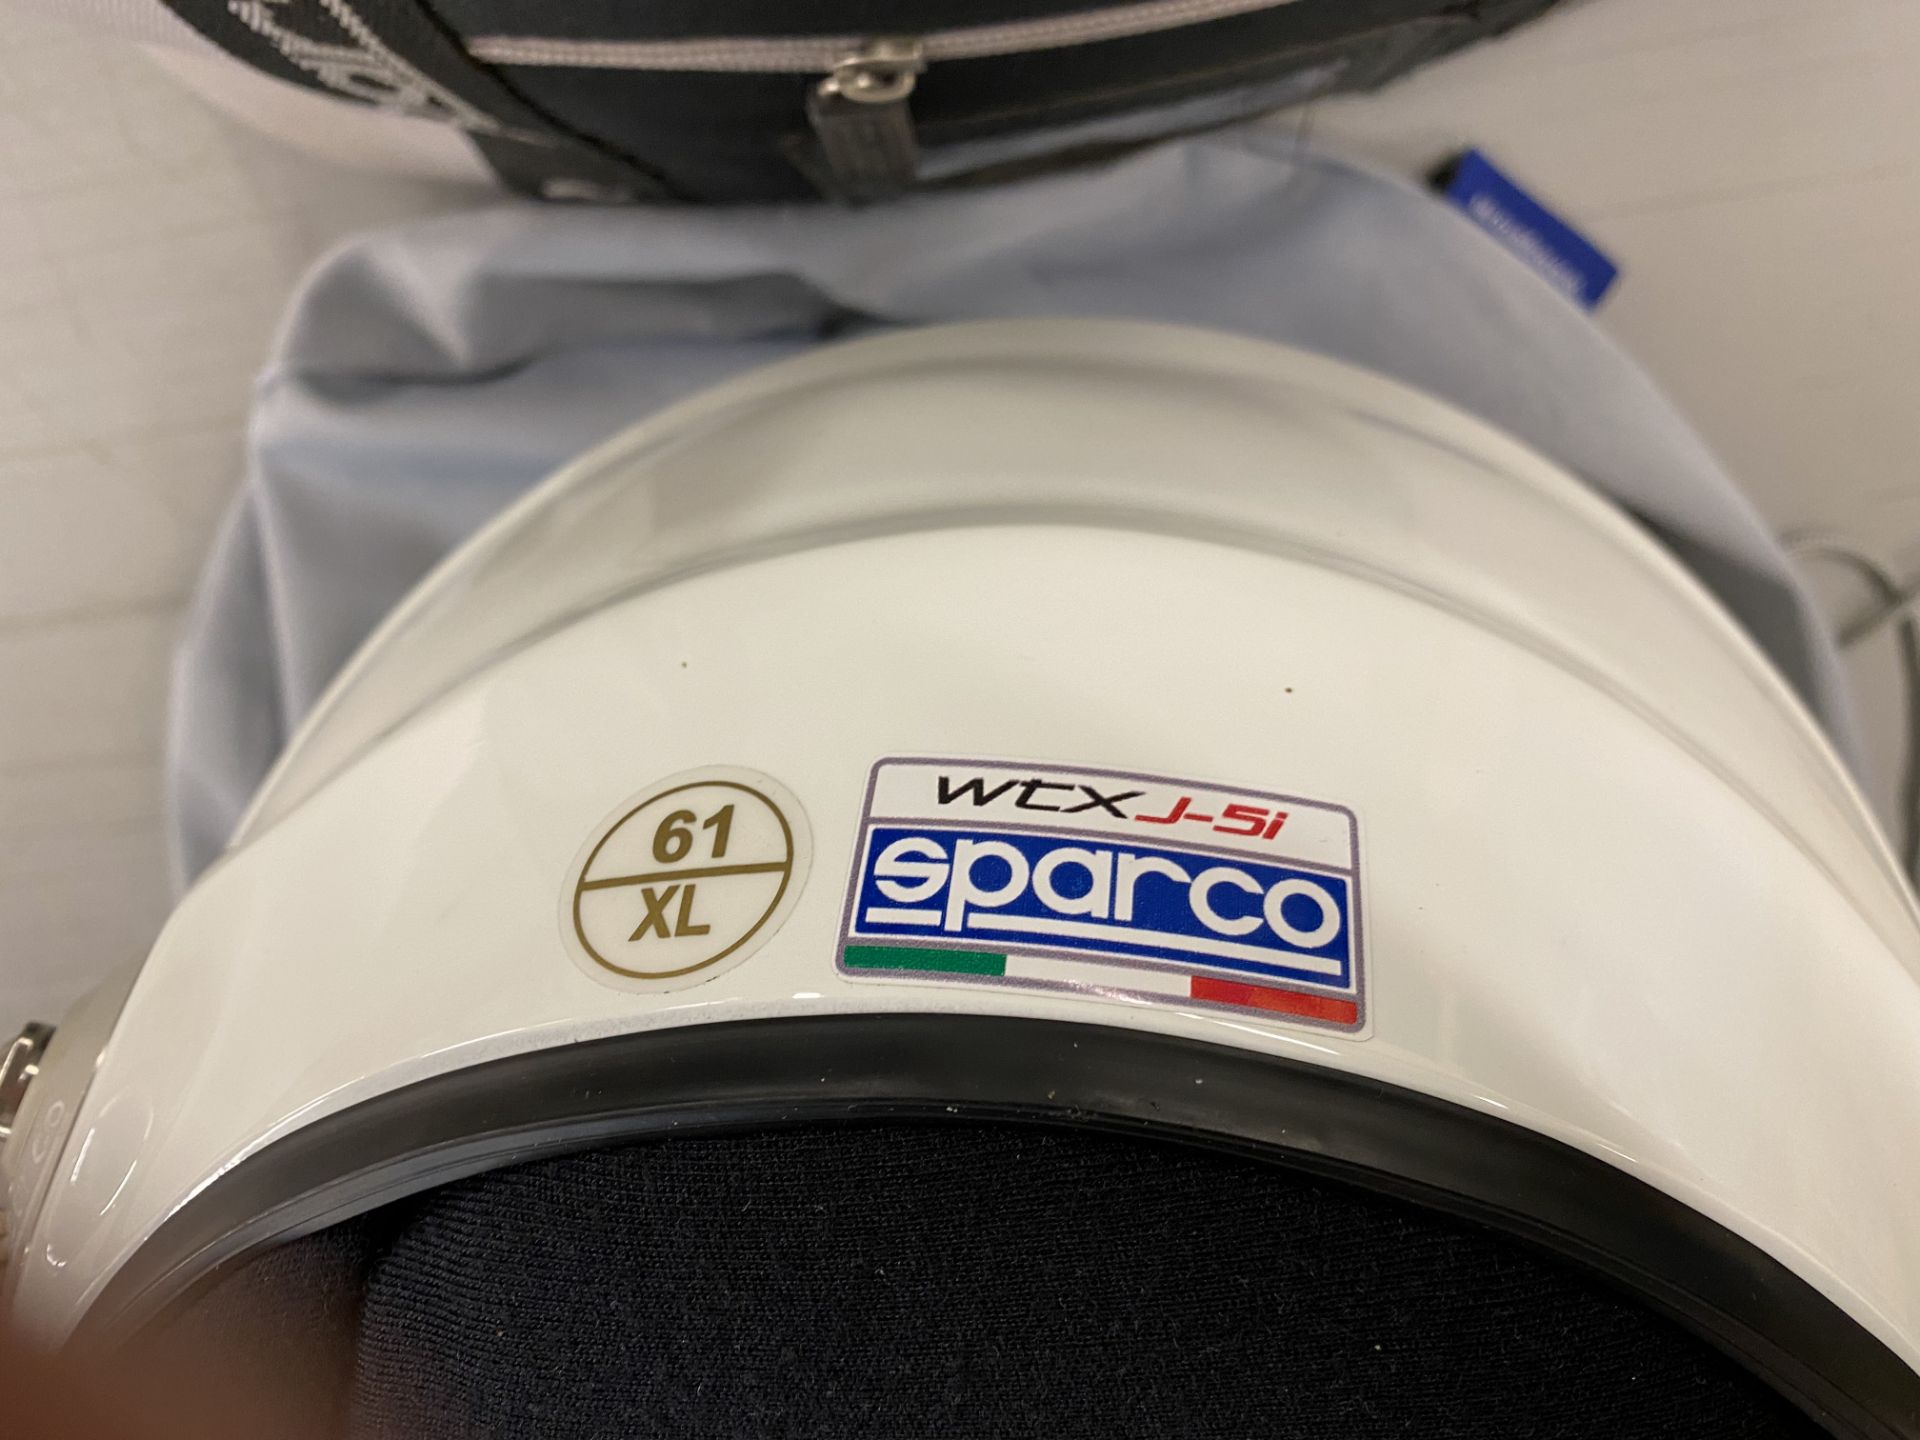 Sparco WTXJ-5i open face racing helmet with microphone and connector with cover and storage bag size - Image 5 of 6